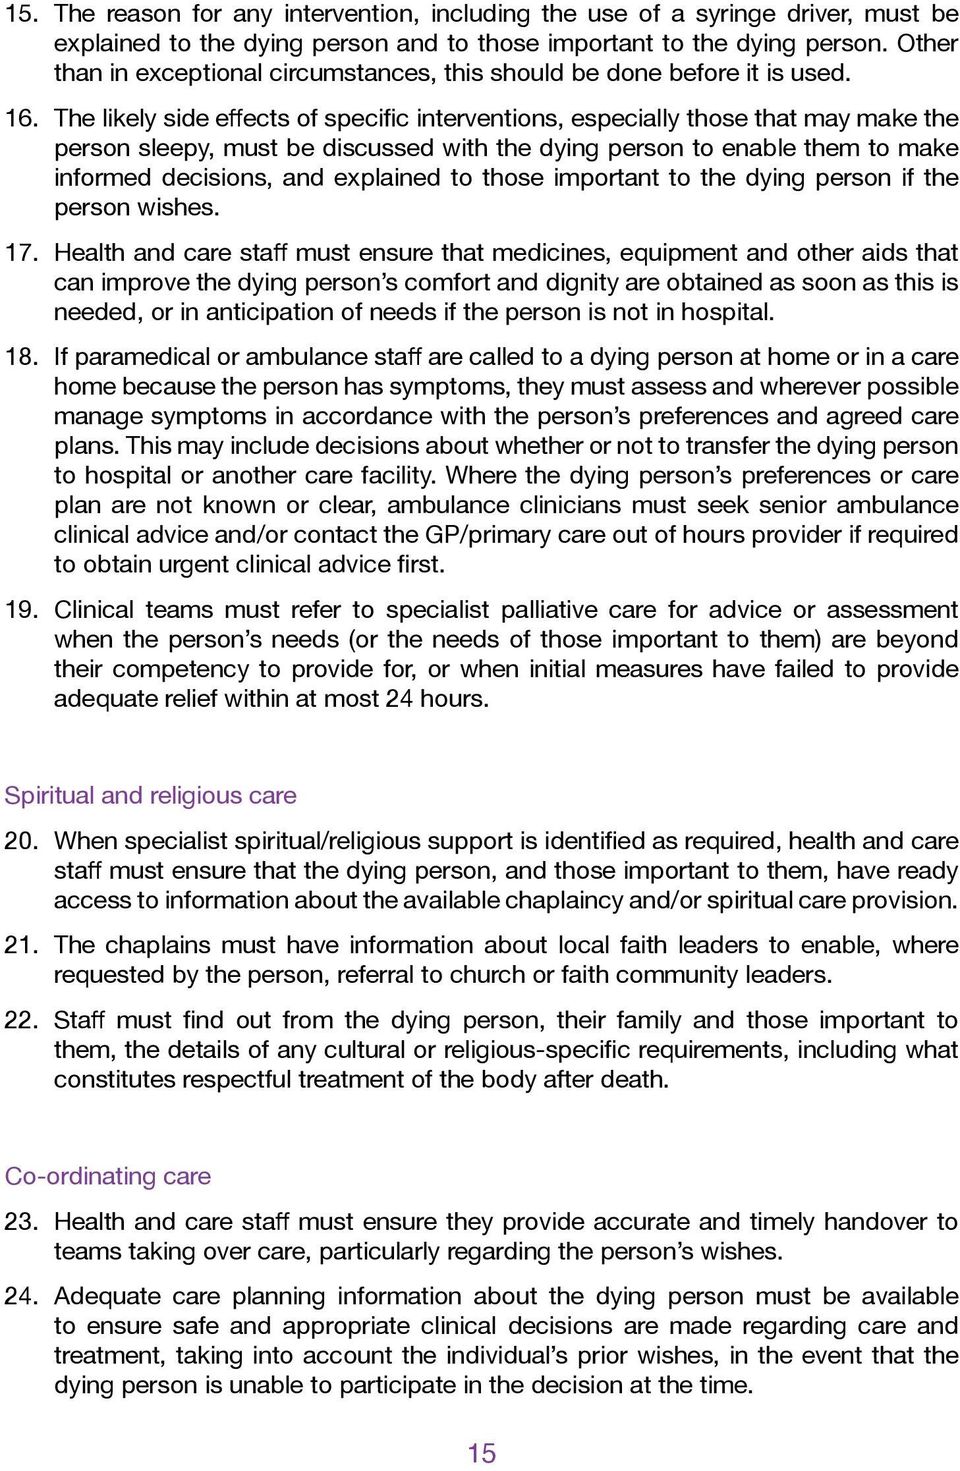 The likely side effects of specific interventions, especially those that may make the person sleepy, must be discussed with the dying person to enable them to make informed decisions, and explained